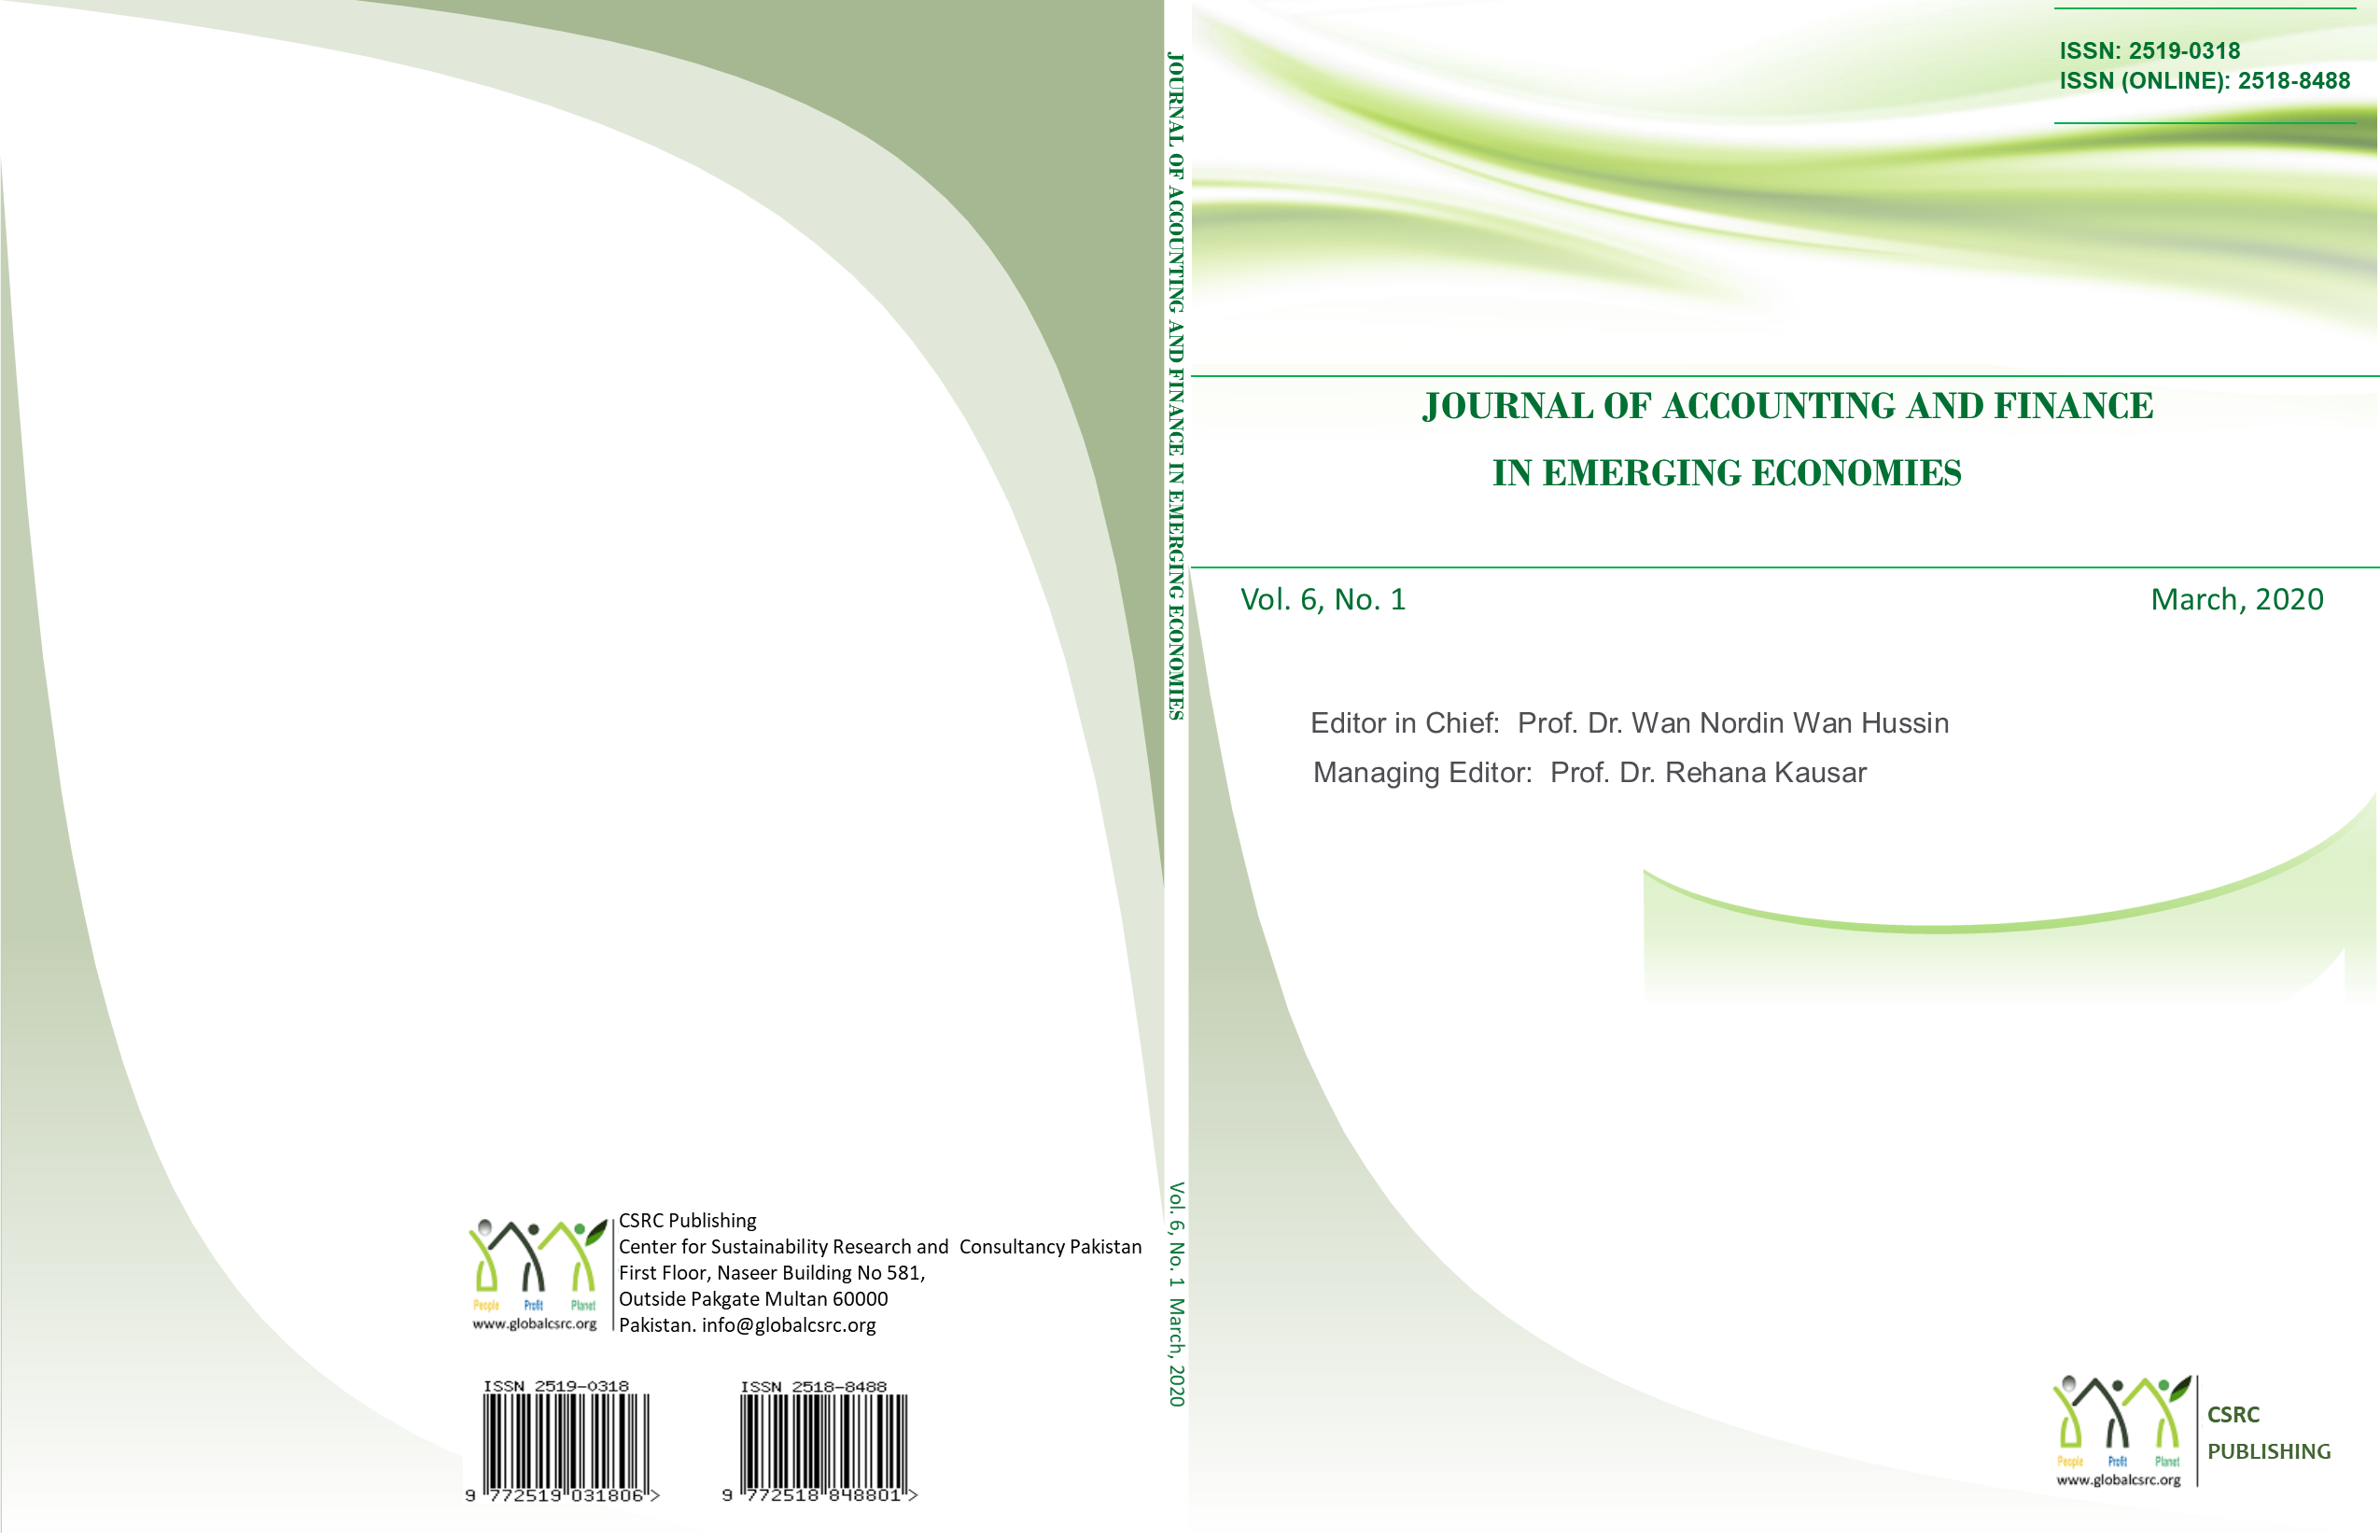 Journal of accounting and Finance in Emerging Economies